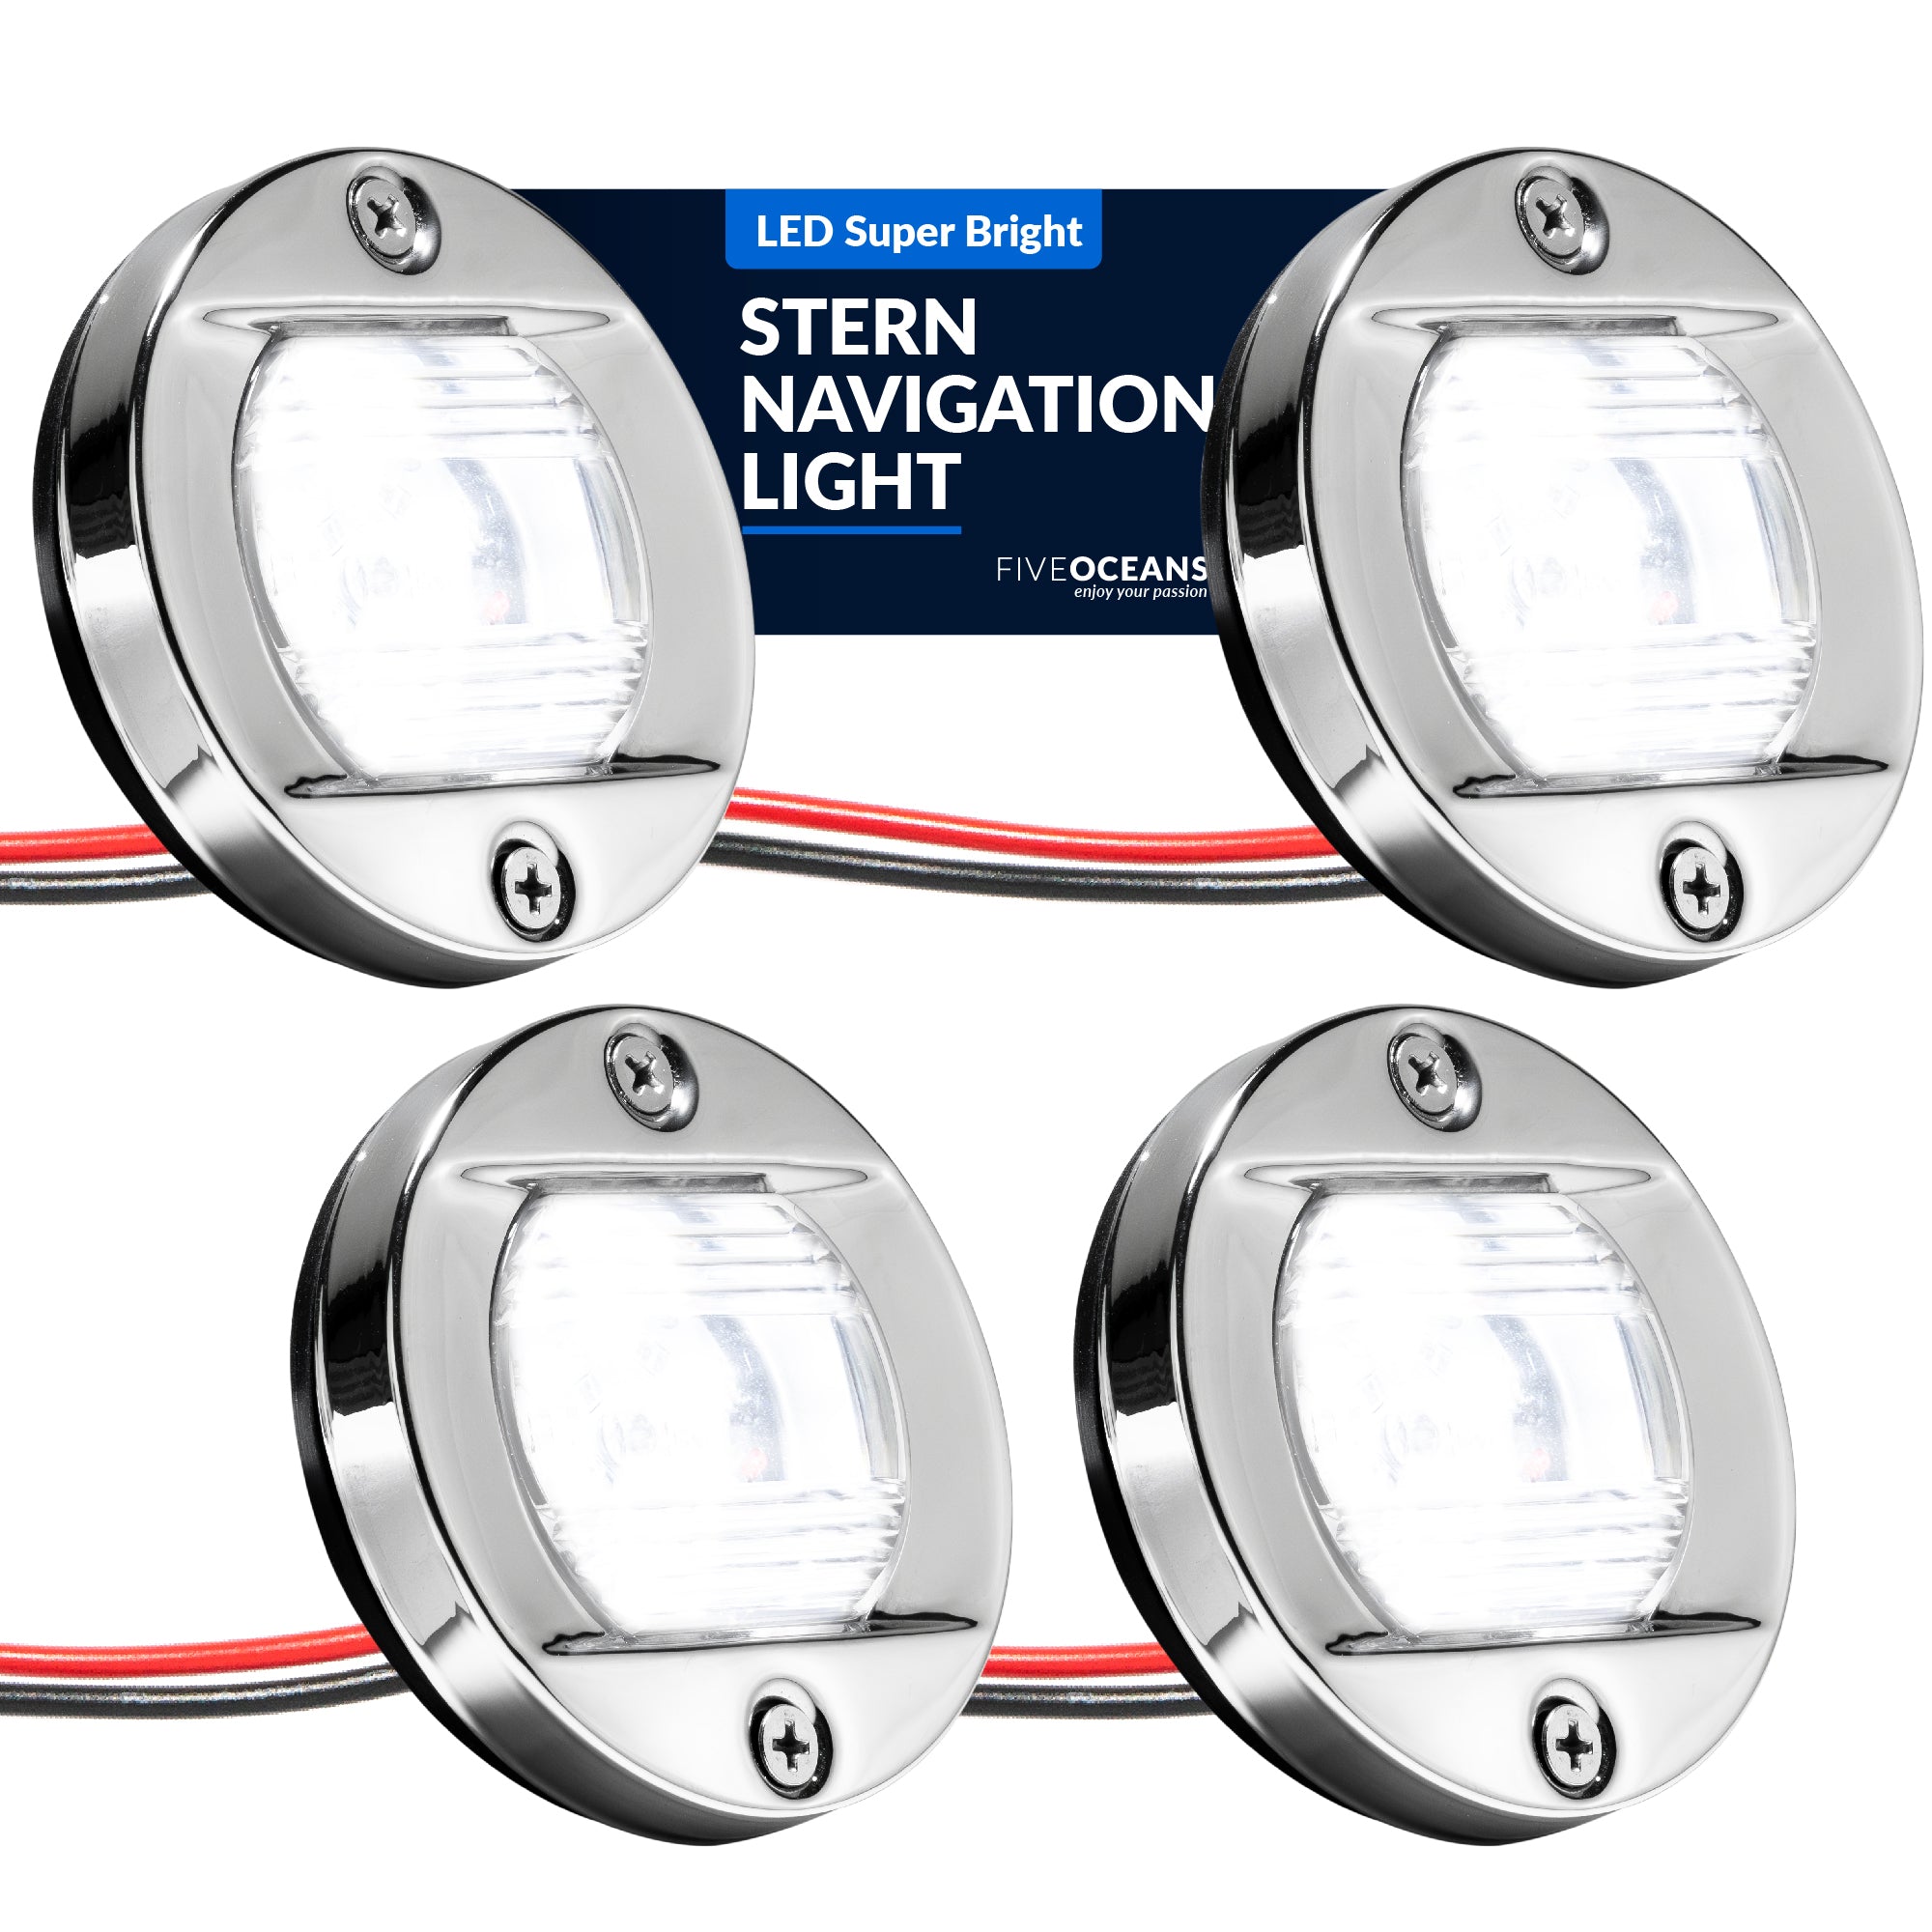 LED Courtesy Navigation Lights, Round Stainless Steel, Daylight, 4-Pack - FO3906-M4